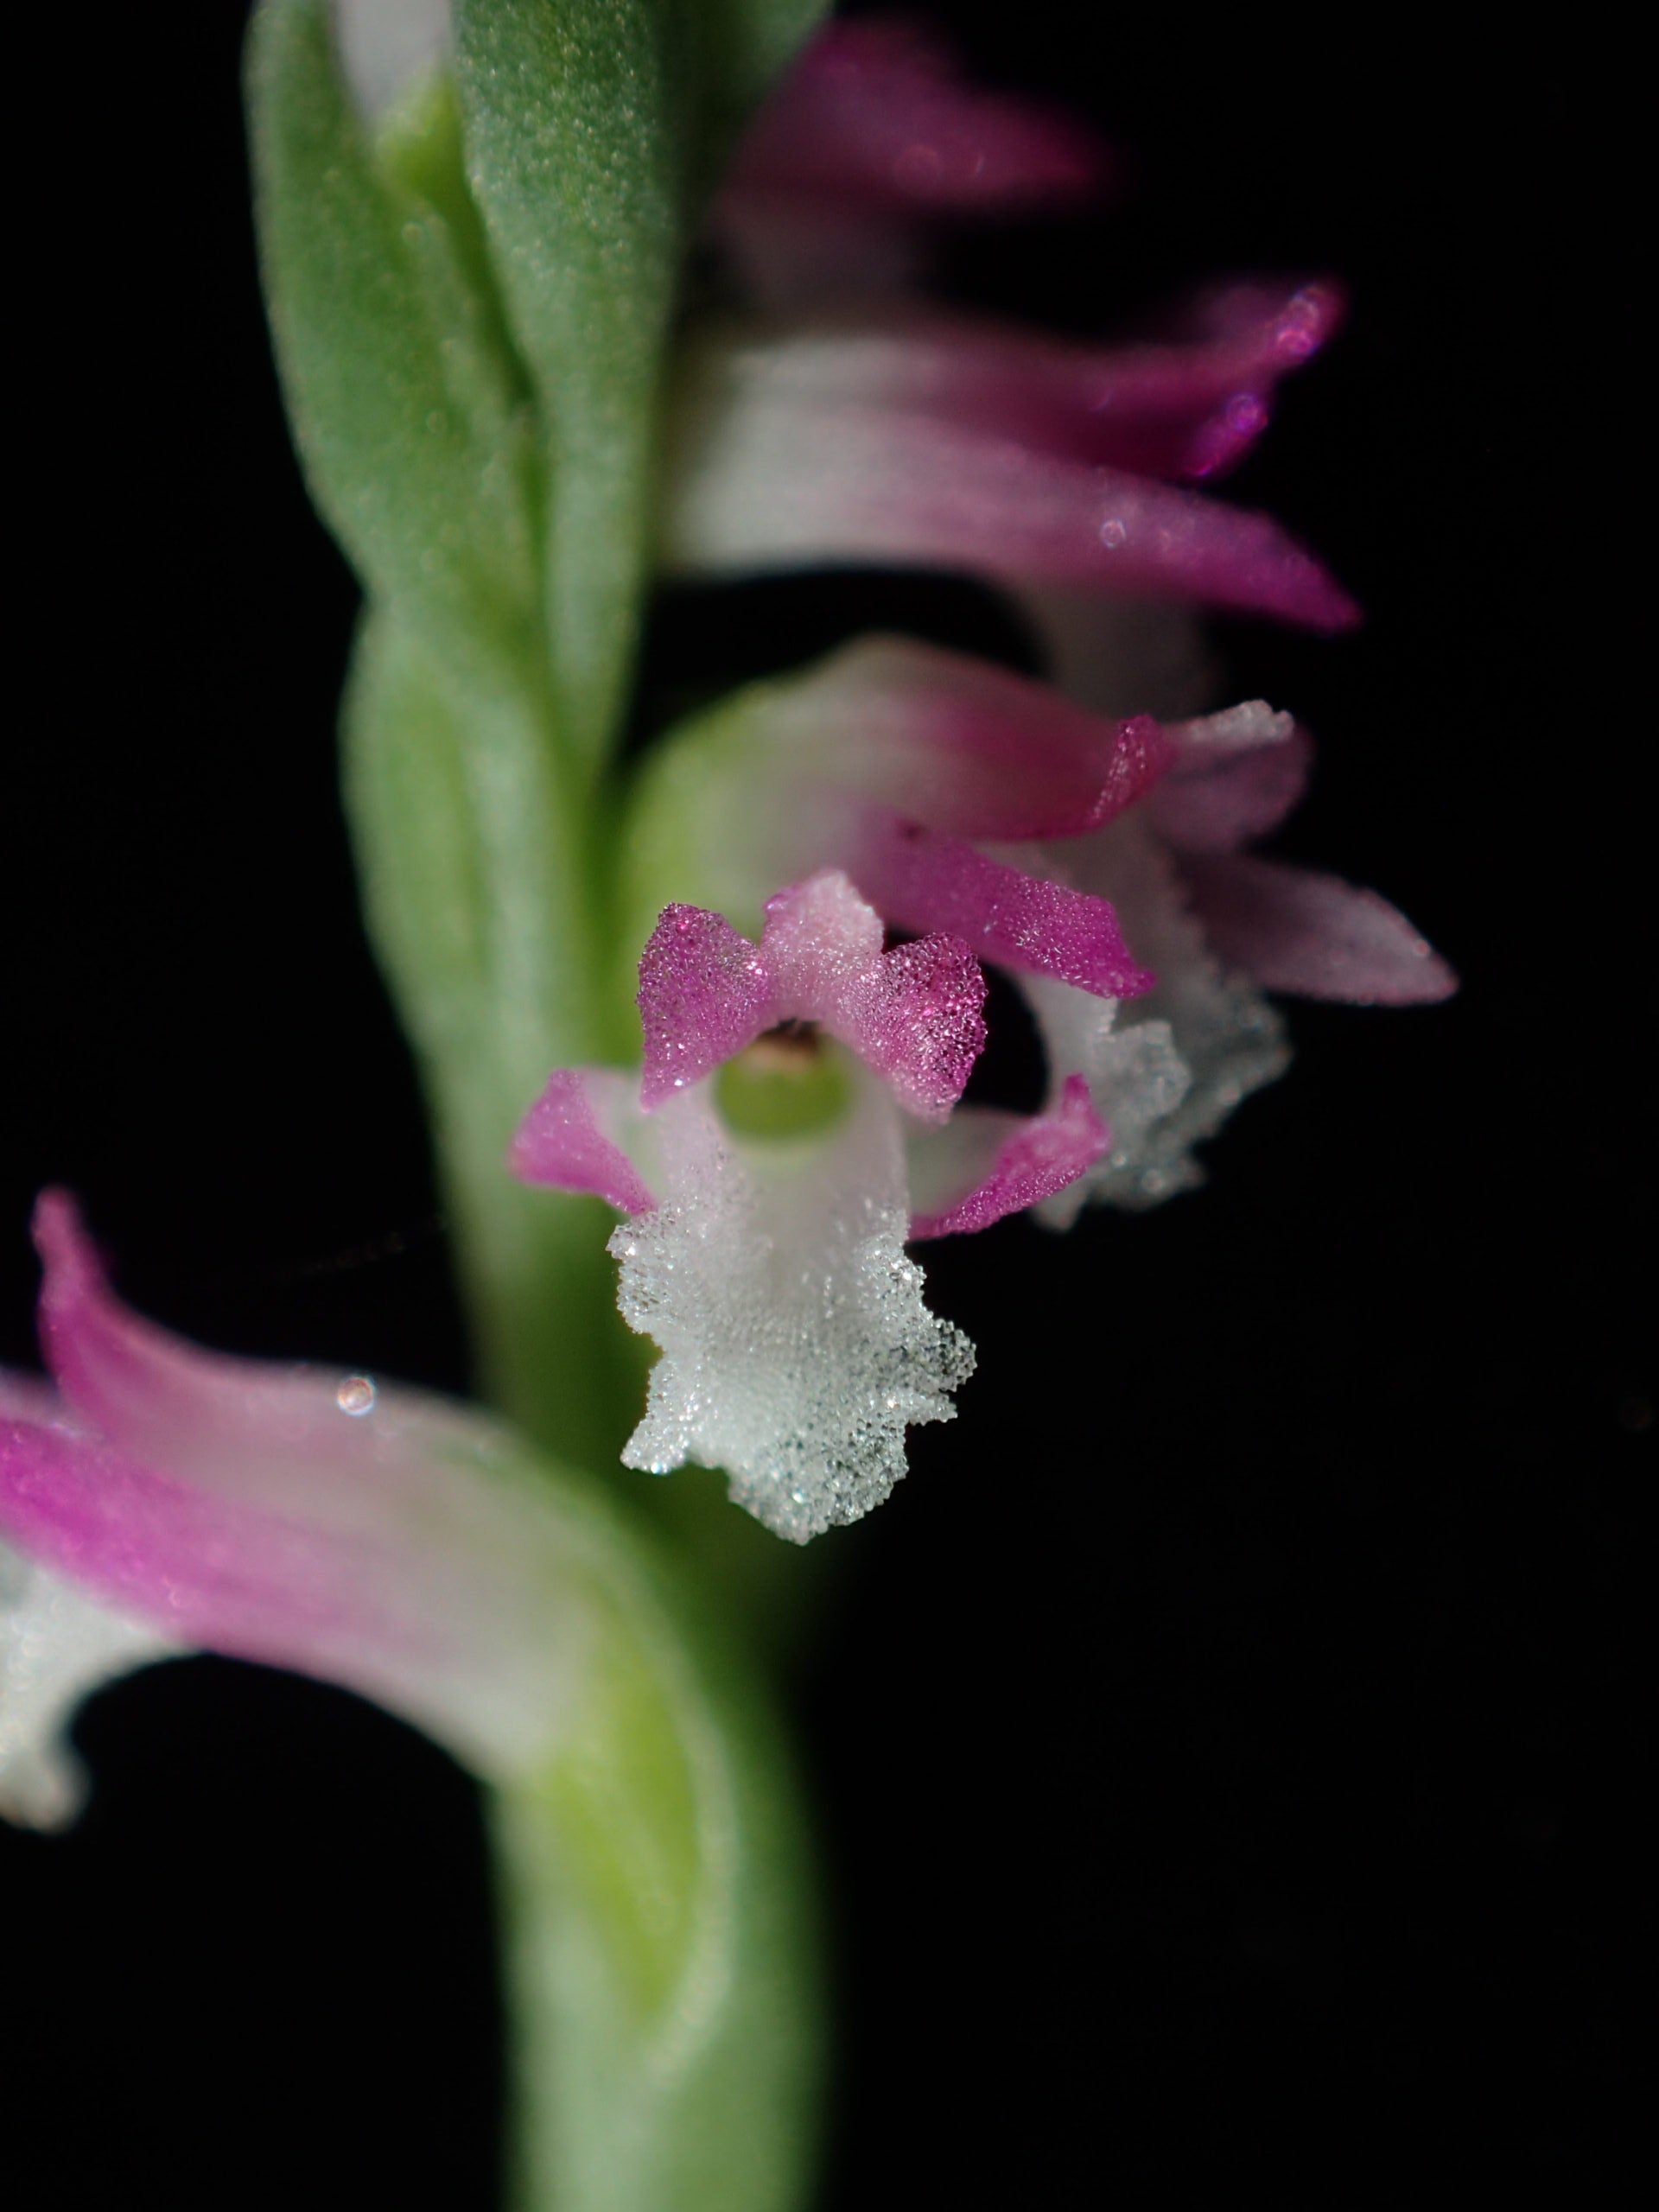 This new species of pink orchid looks like delicate glasswork